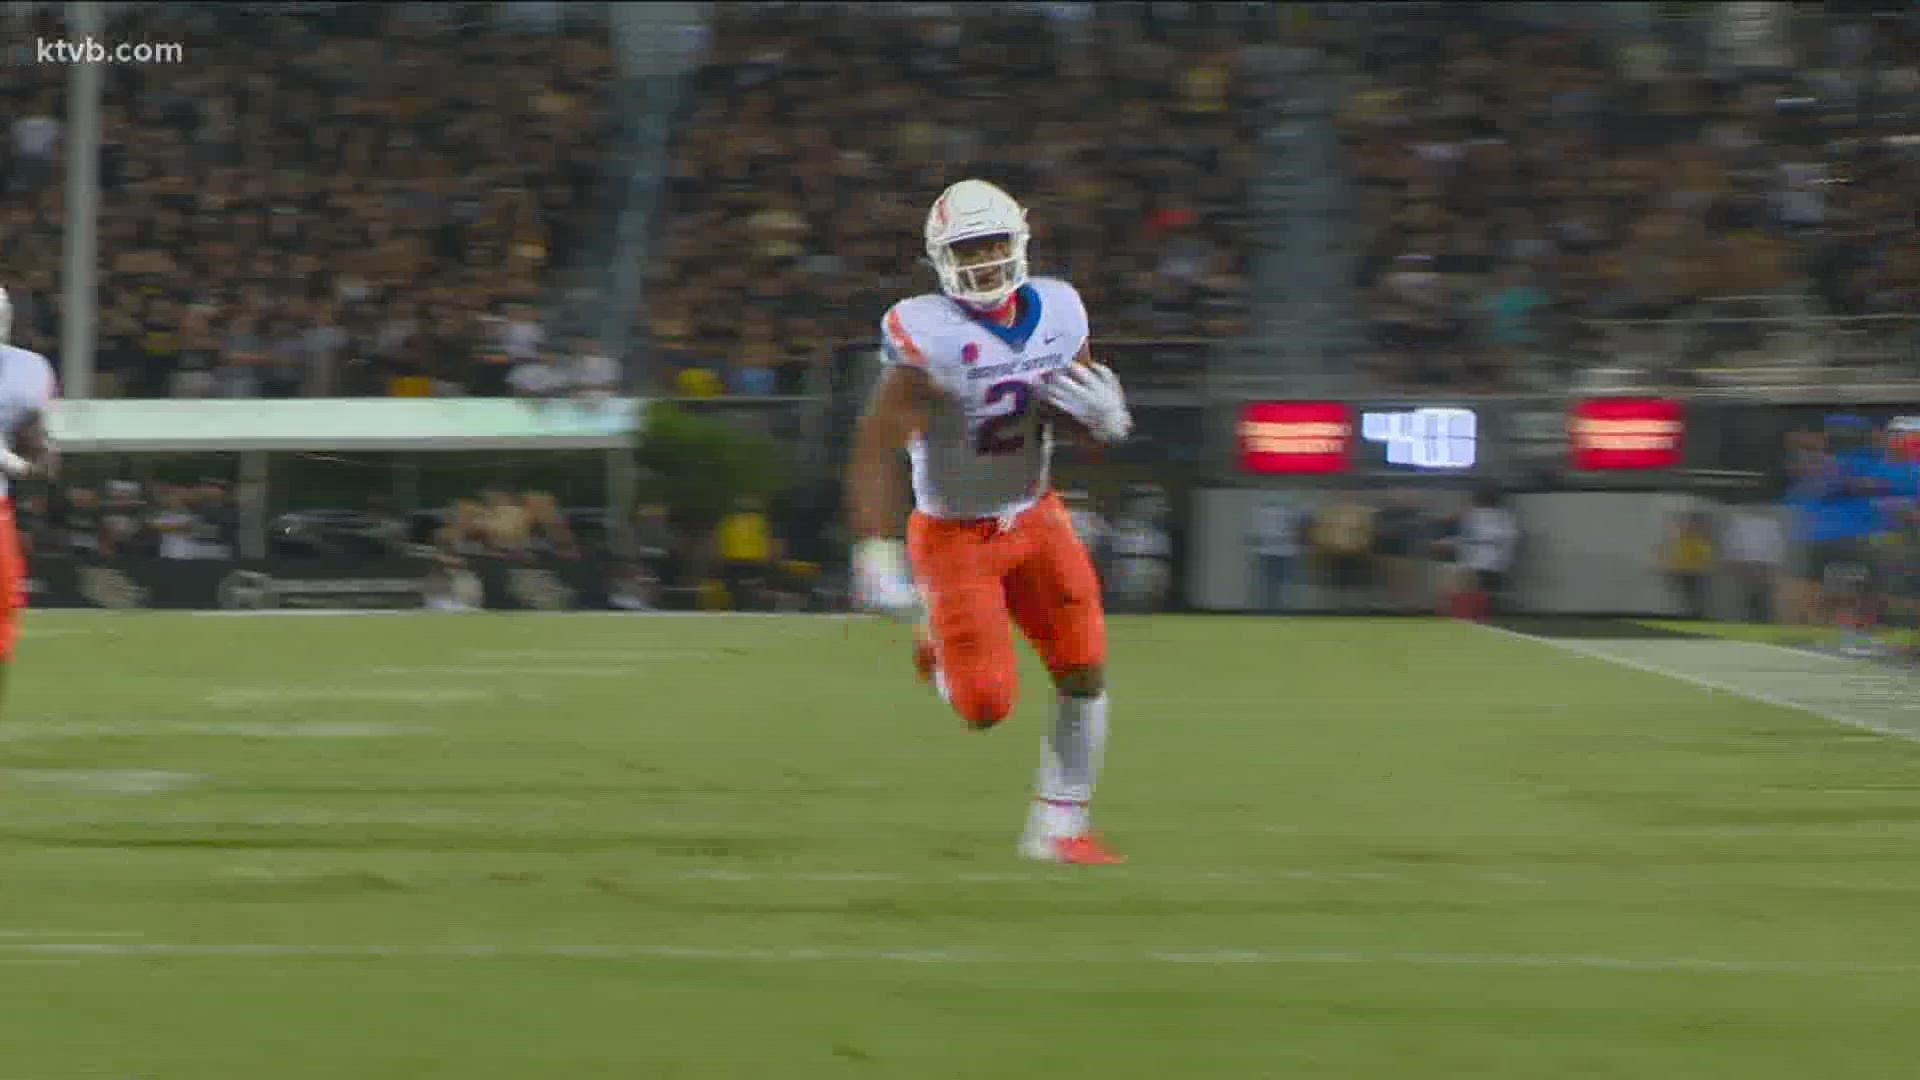 After Boise State jumped to a 21-0 lead, the Knights stole momentum and never let go.